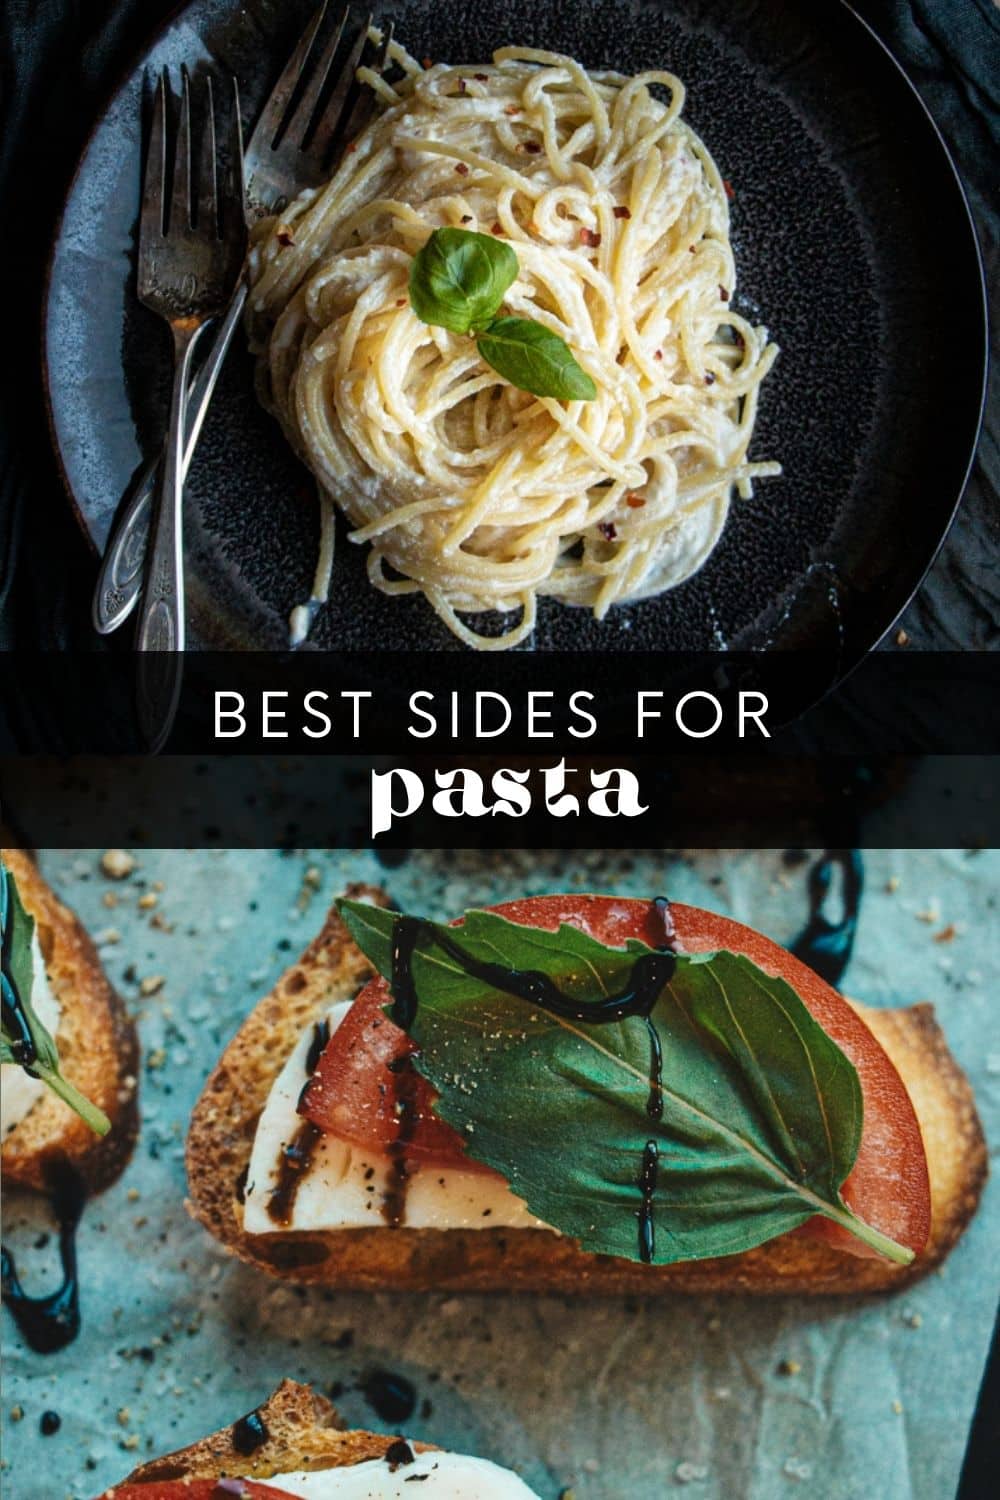 While pasta is usually the star of the show, side dishes can elevate any meal. So, don't overlook the power of these delicious pasta side dishes! This complete list has everything you could possibly want in a pasta side dish - from simple salads to hearty breads and more.